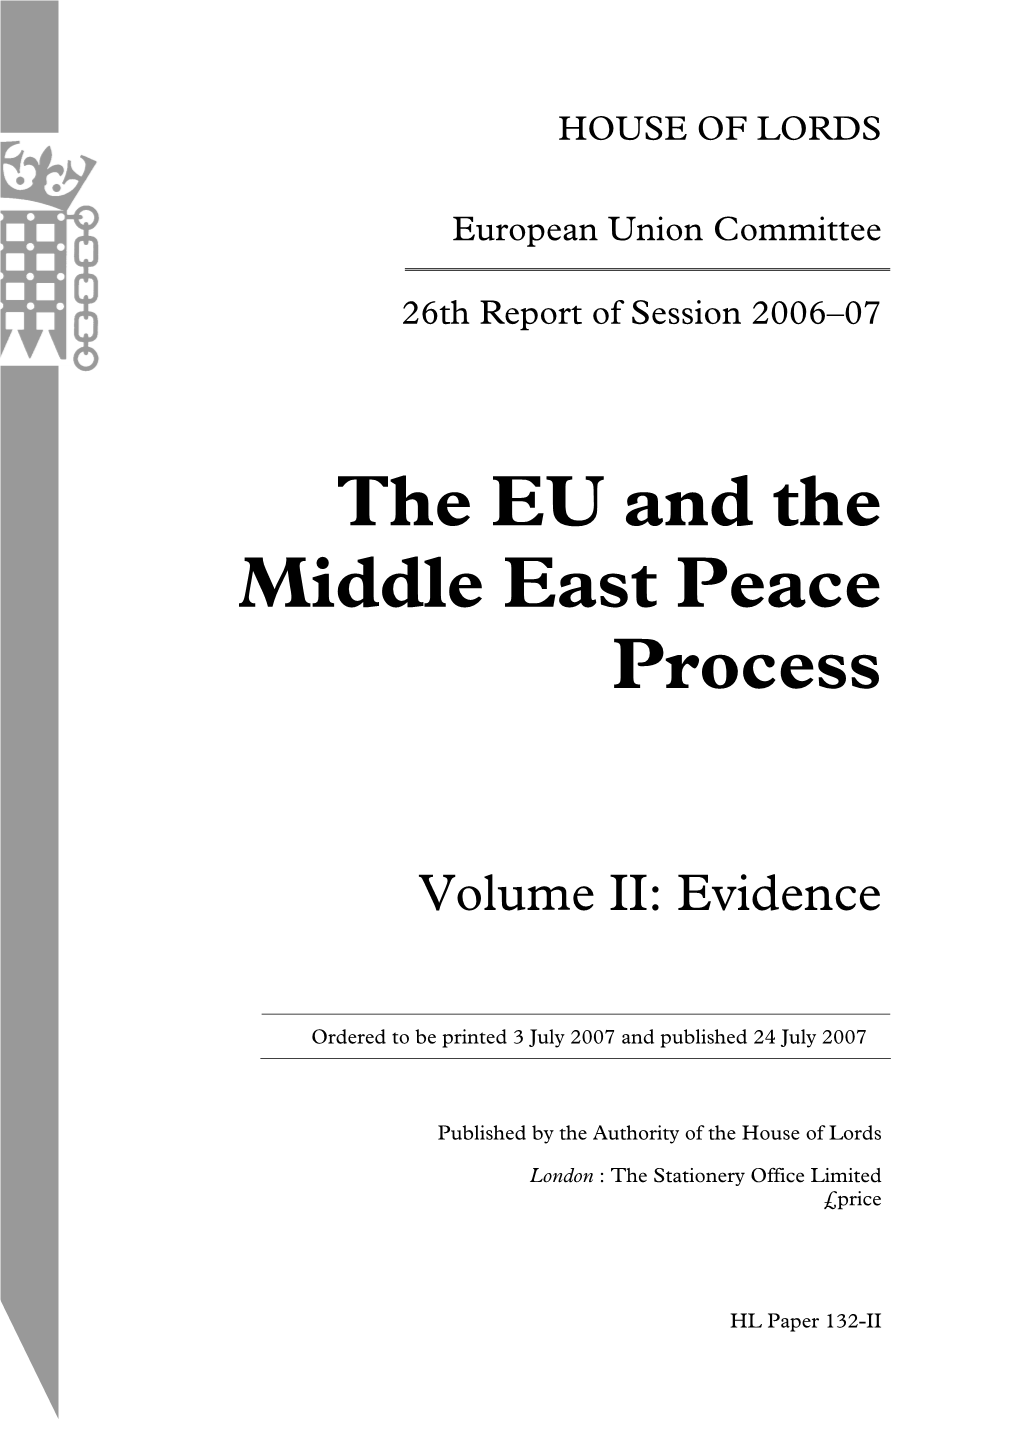 The EU and the Middle East Peace Process